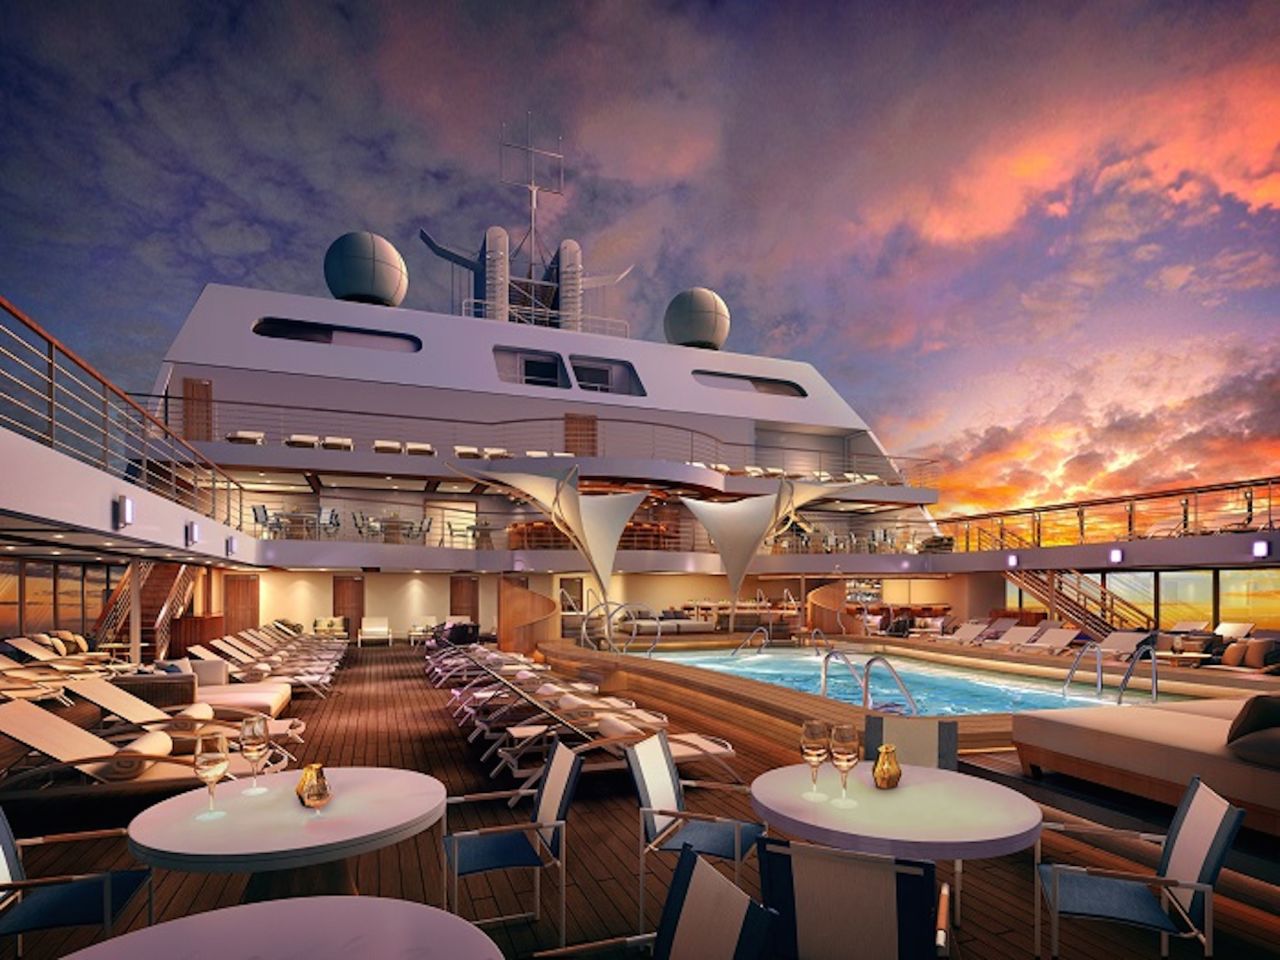 Carrying just 600 guests, this 12-level ship will have 300 opulent suites (each with a private veranda) and visits ports nestled in tight spots the big ships can't access. It begins sailing in December 2016, leaving port in Greece before making its way through the Middle East and Asia.